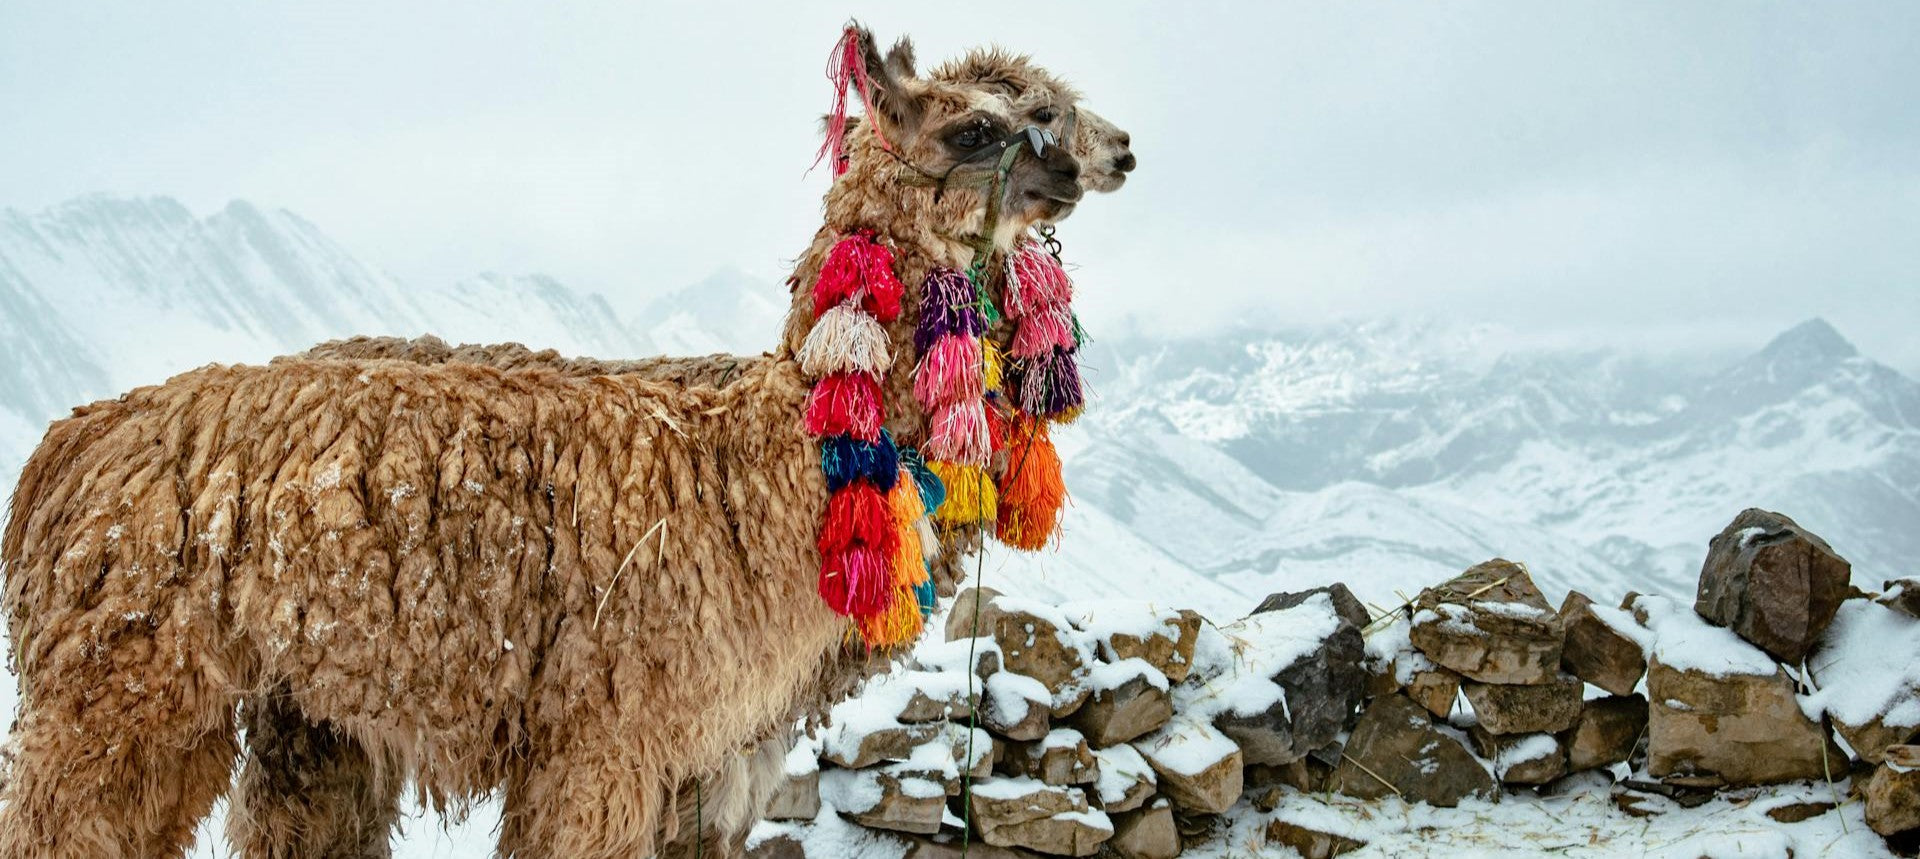 Alpacas in the Andes Mountains